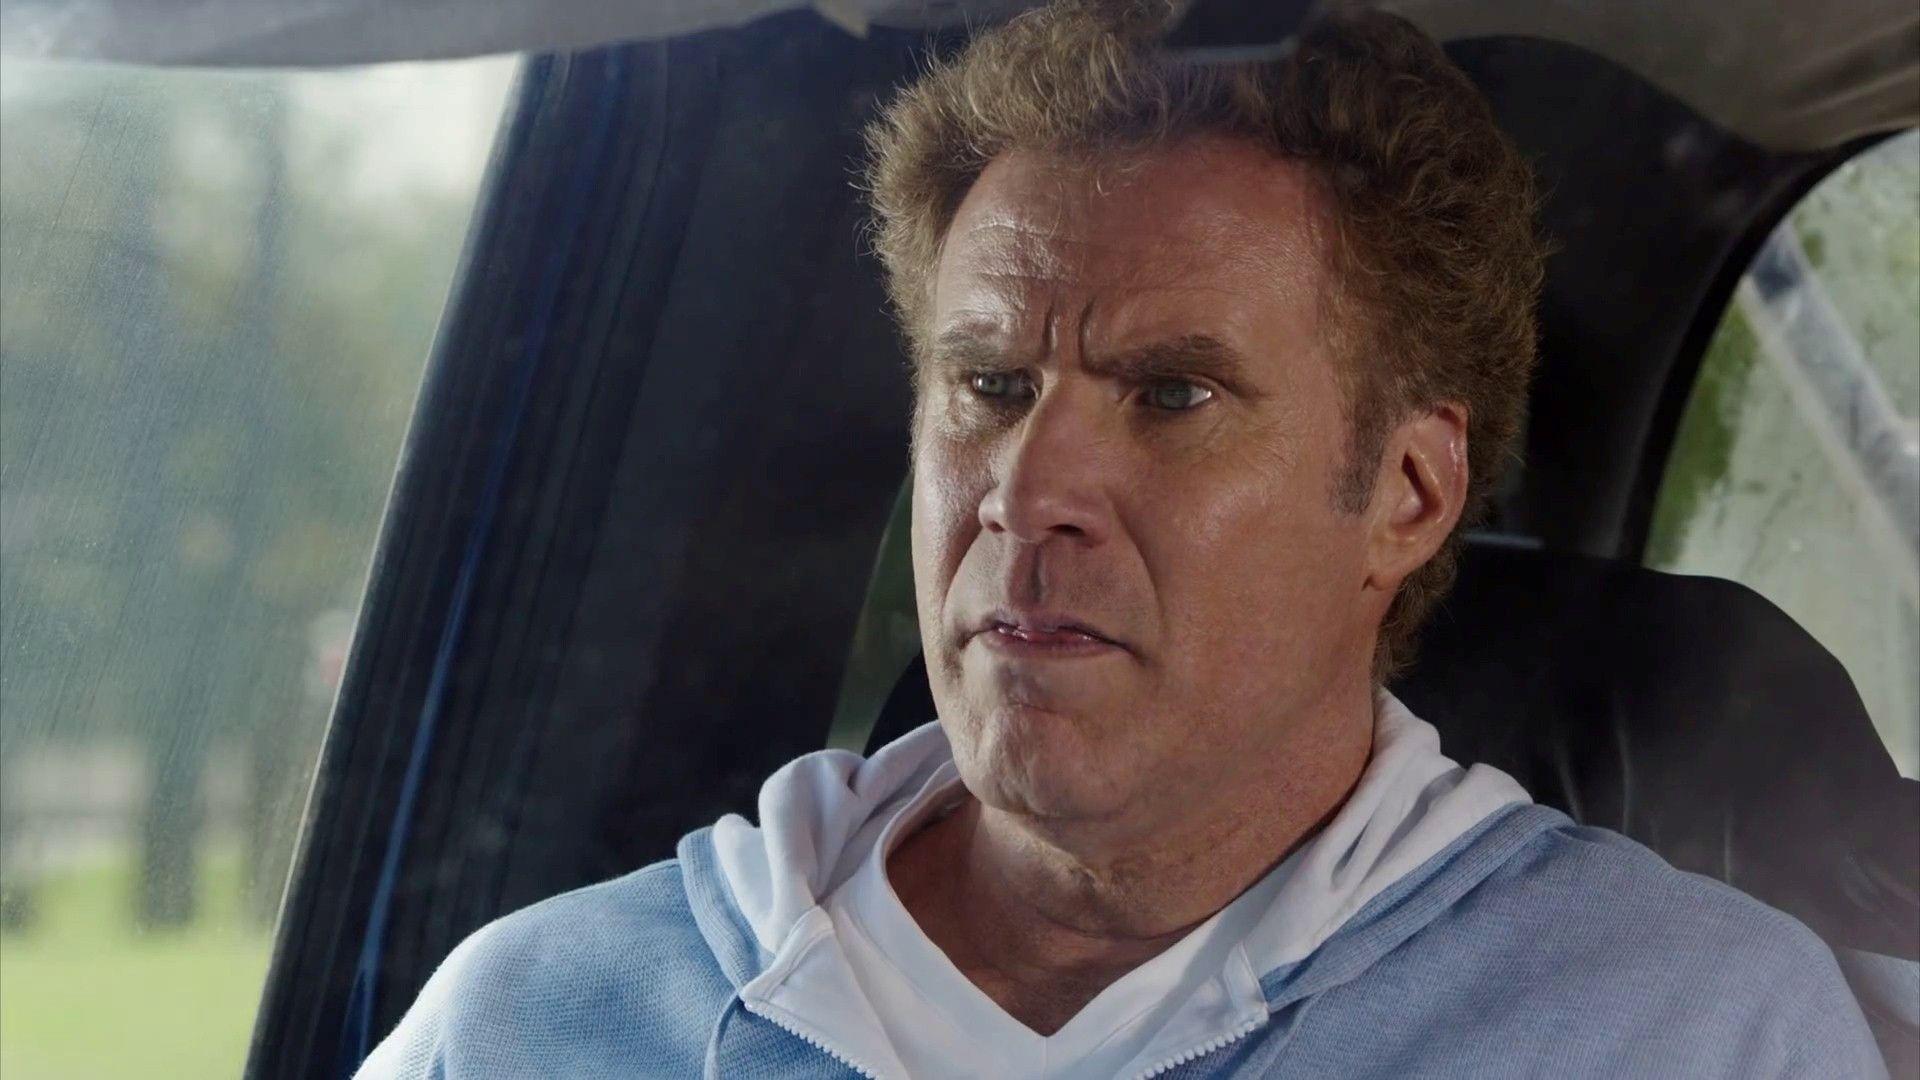 Will Ferrell in New Hollywood Film Get Hard HD Image. HD Famous